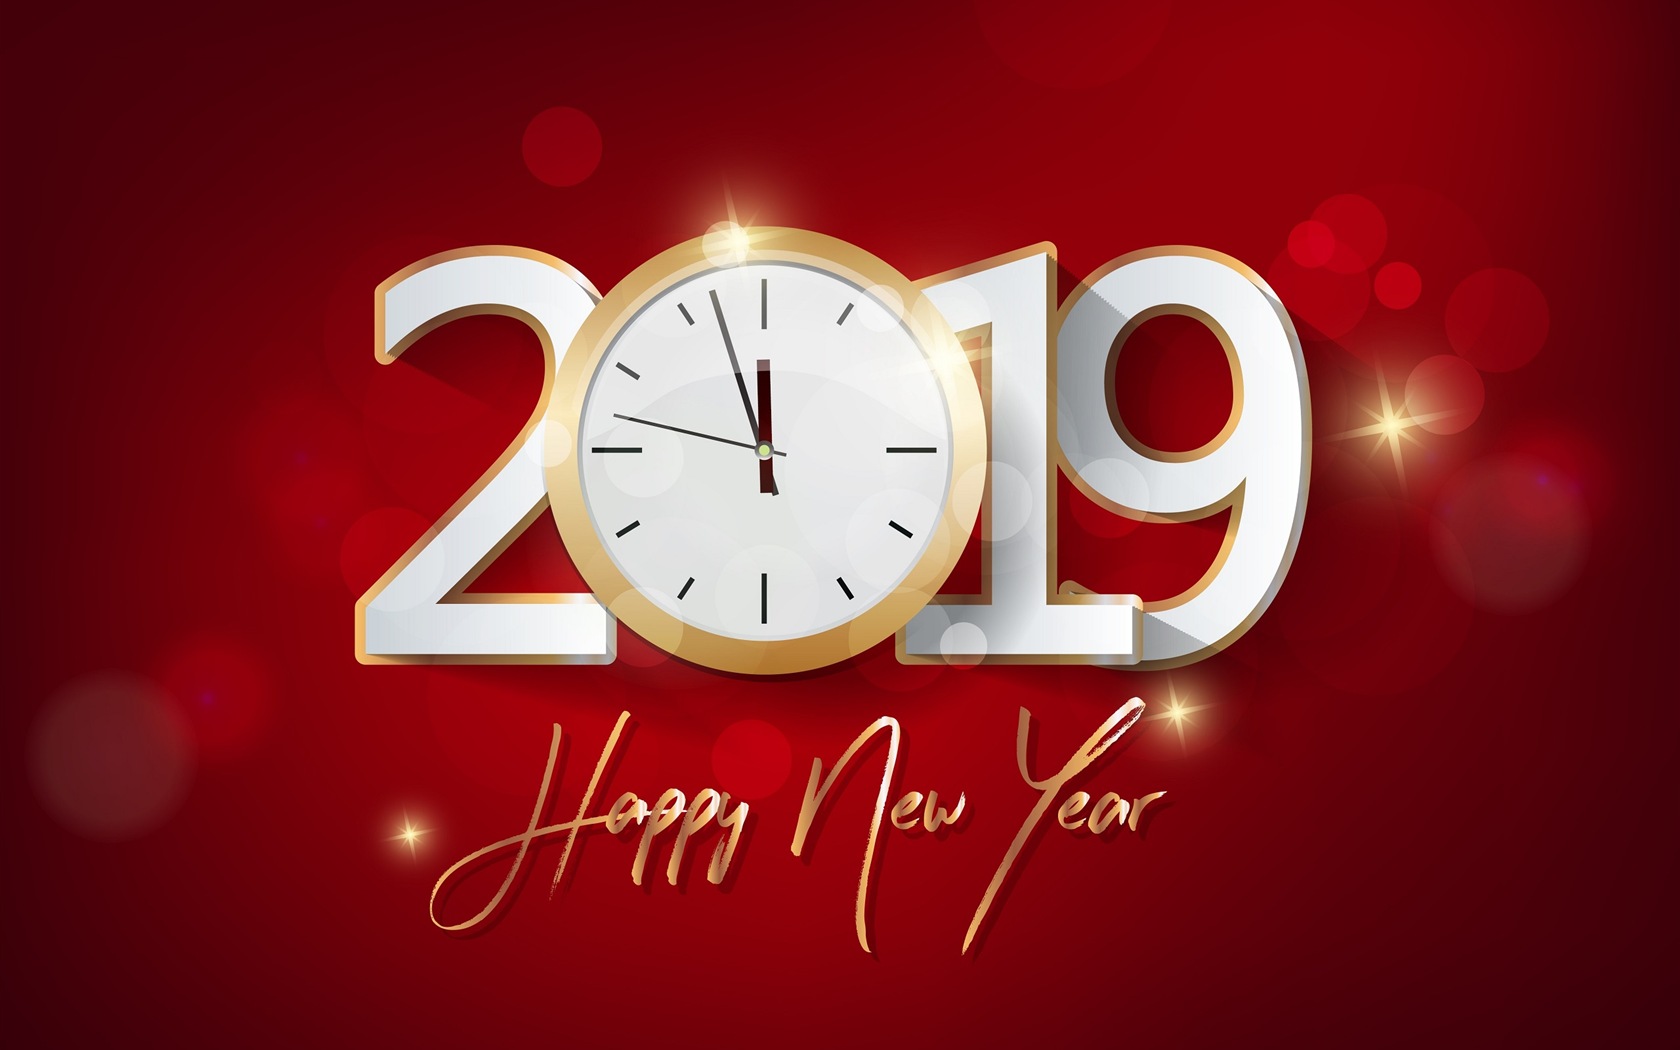 Happy New Year 2019 HD wallpapers #8 - 1680x1050